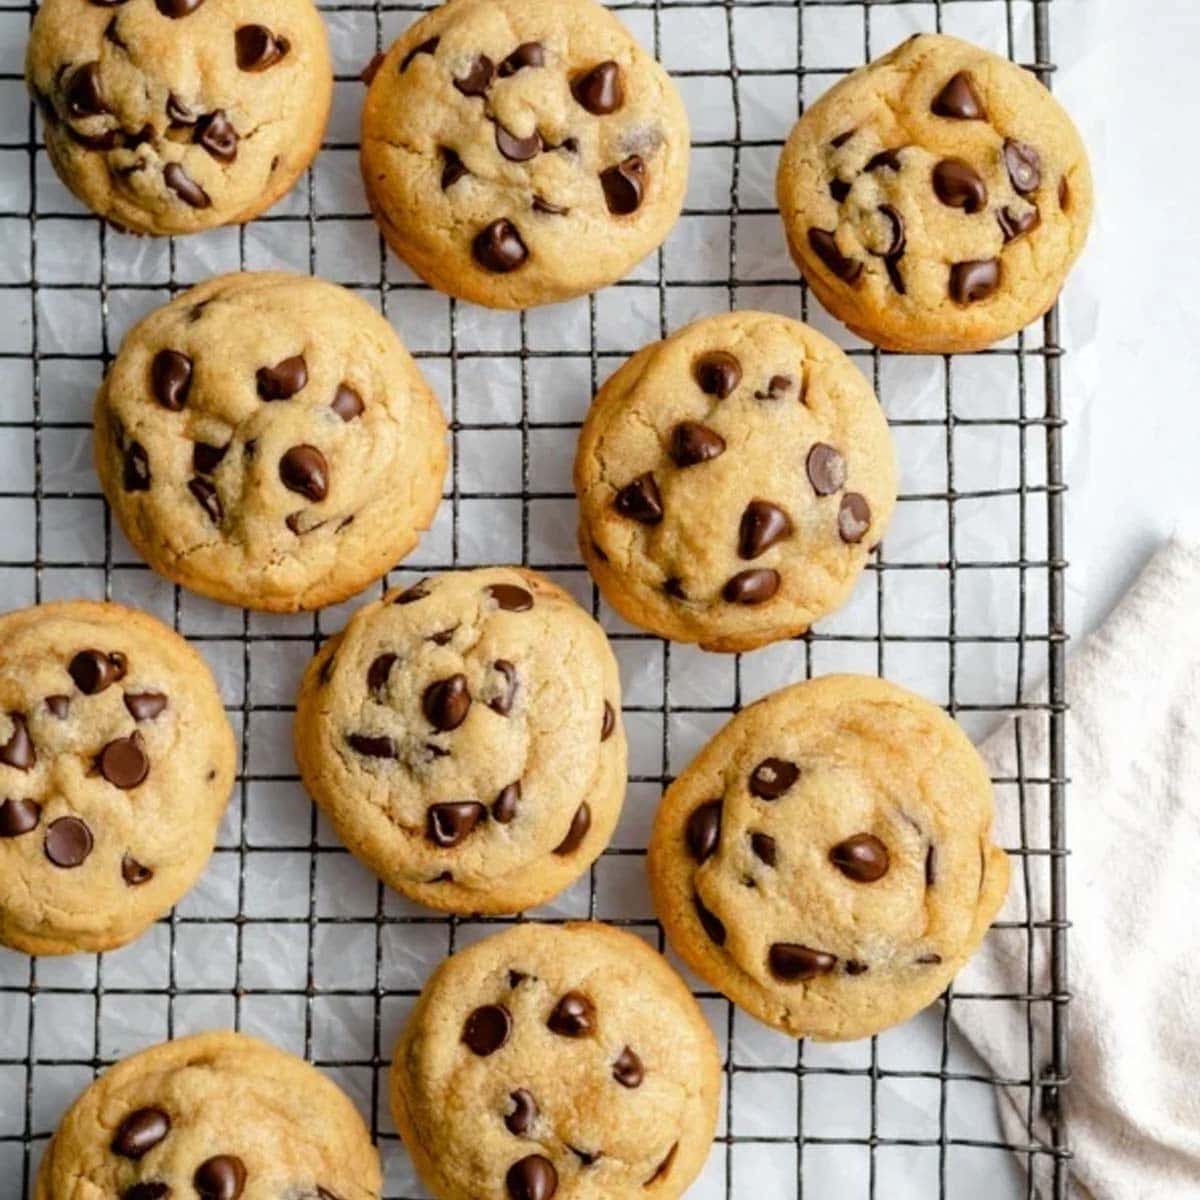 chickpea flour chocolate chip cookies on a wire rack